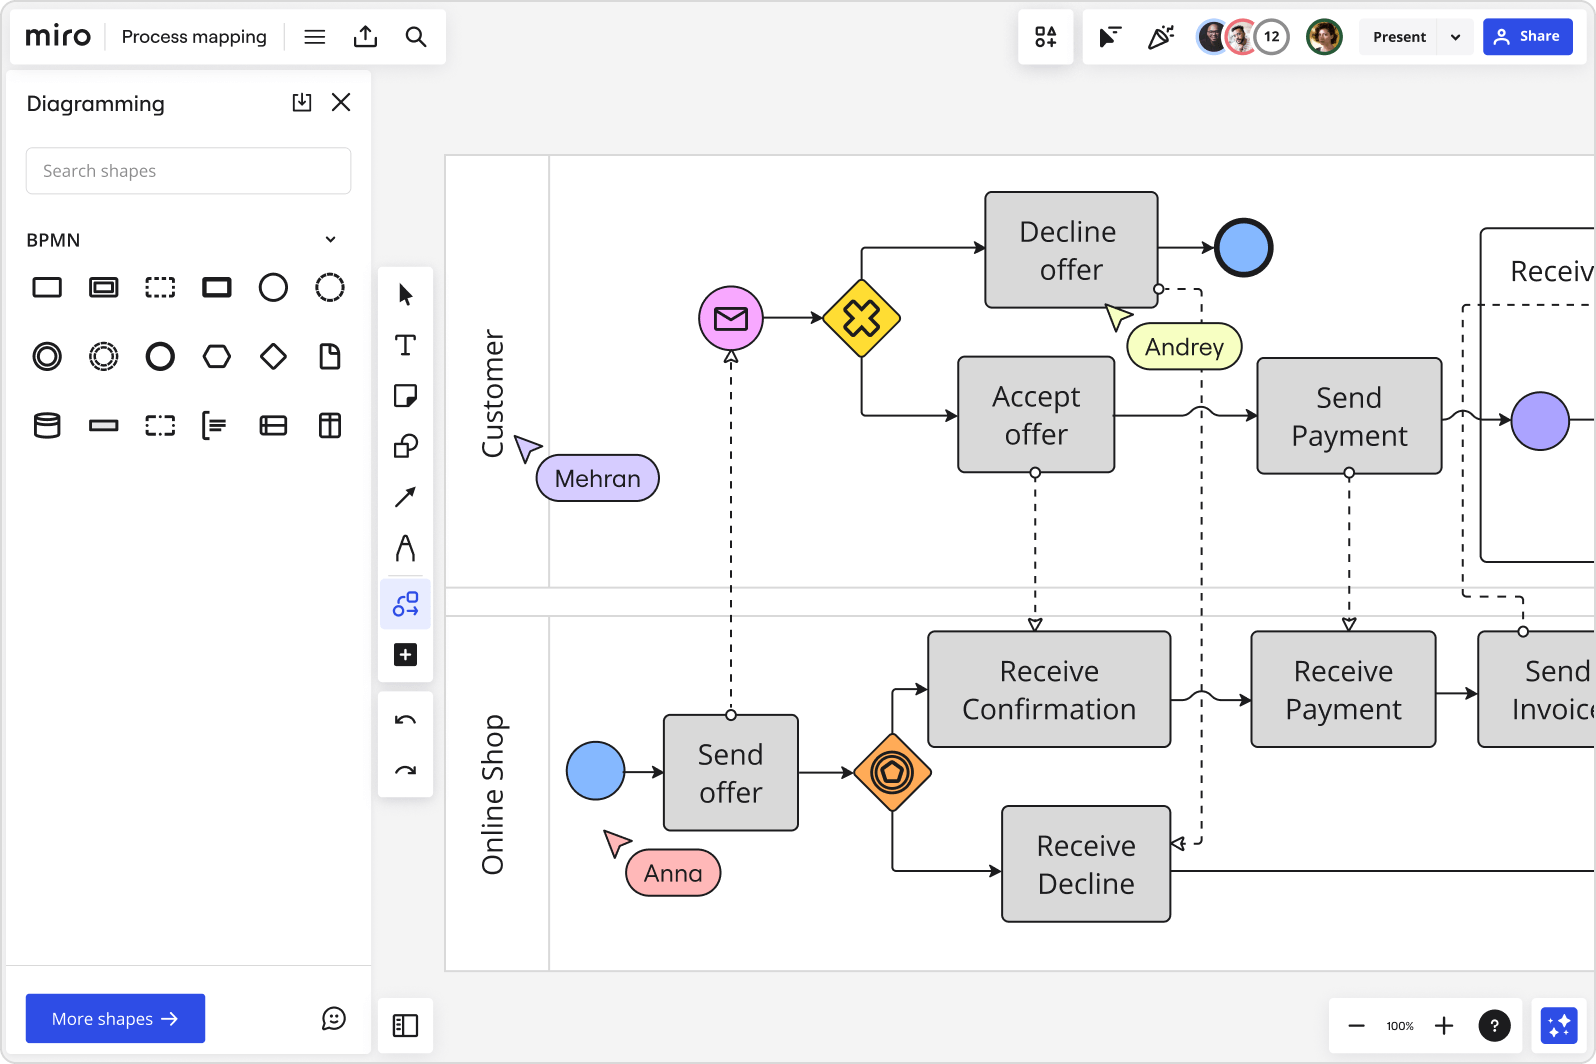 Mapping processes in Miro